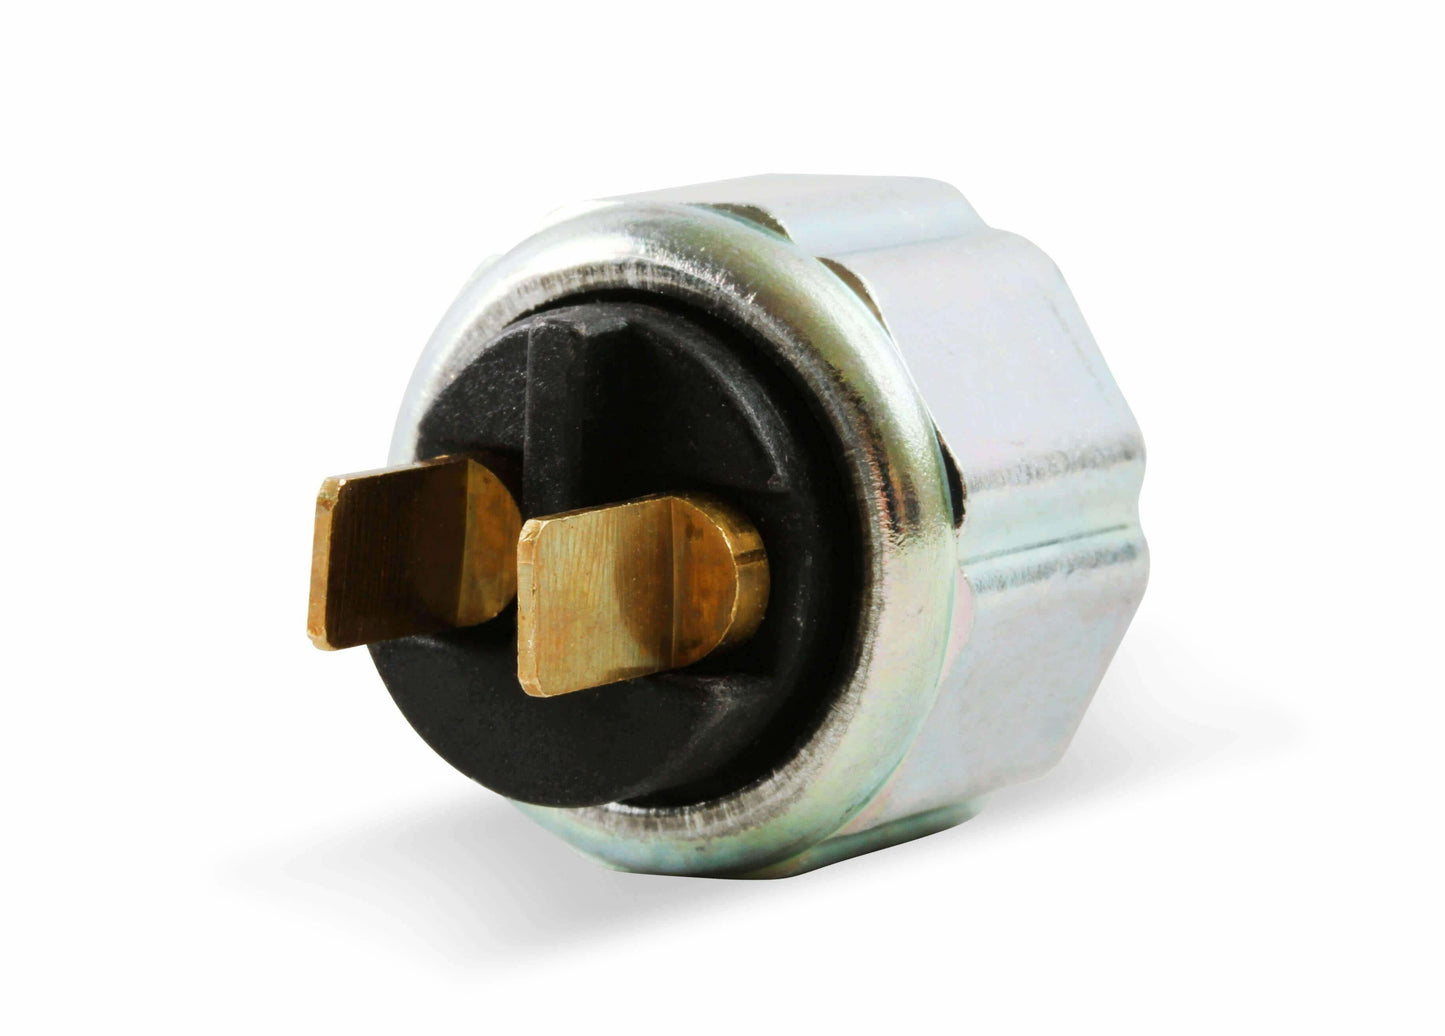 Earls BRAKE LIGHT SWITCH - Pressure Activated - 100186ERL